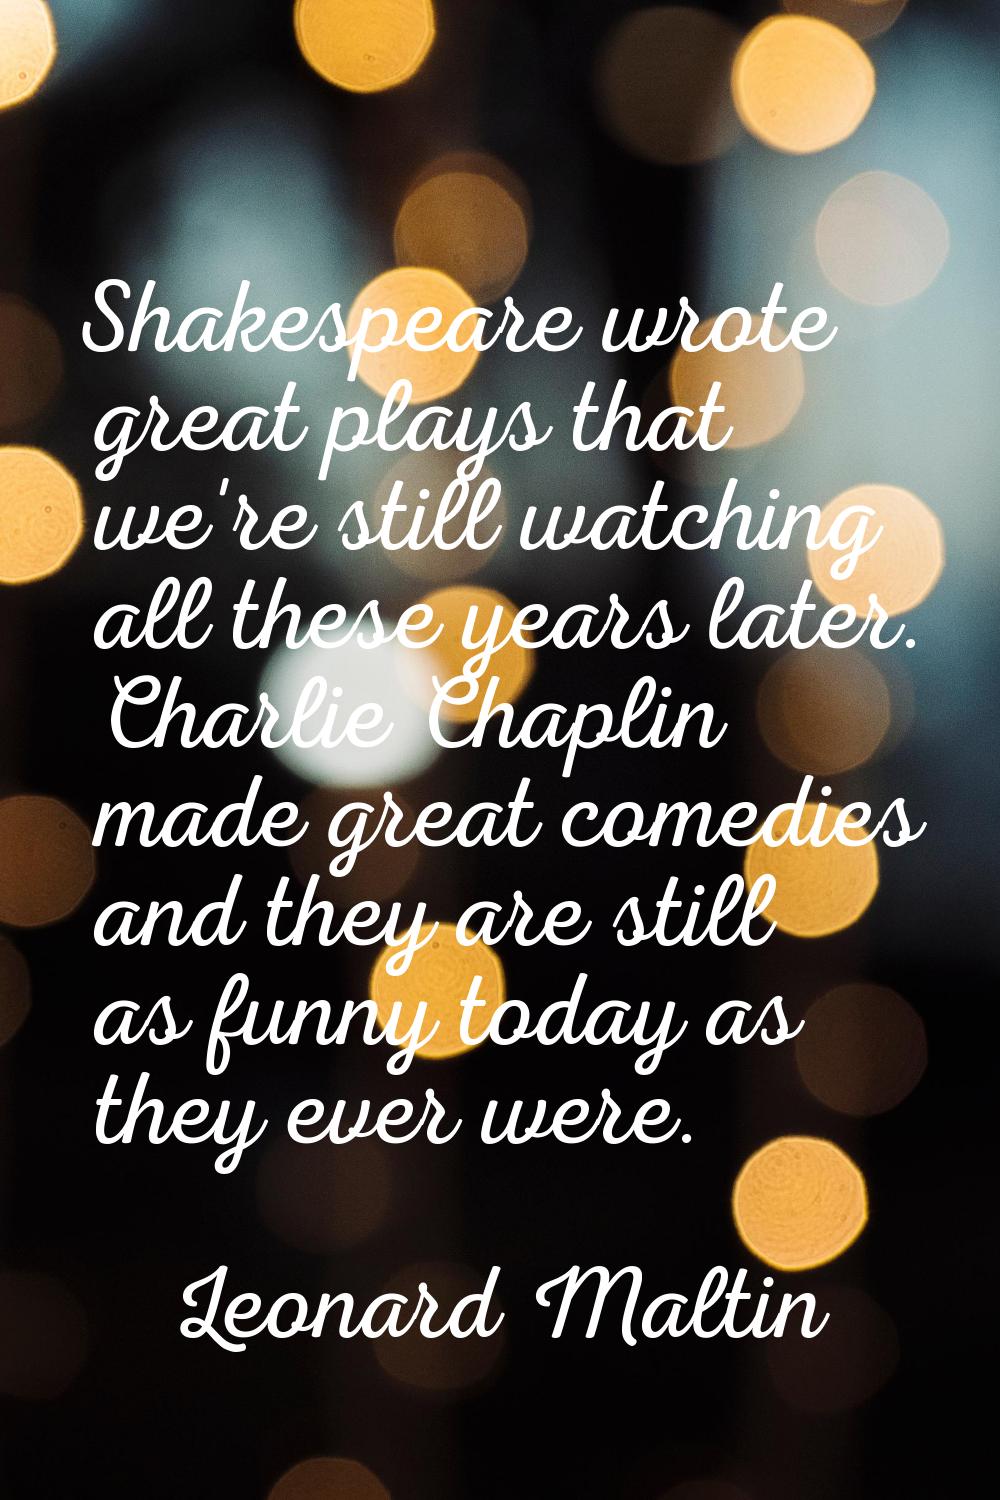 Shakespeare wrote great plays that we're still watching all these years later. Charlie Chaplin made